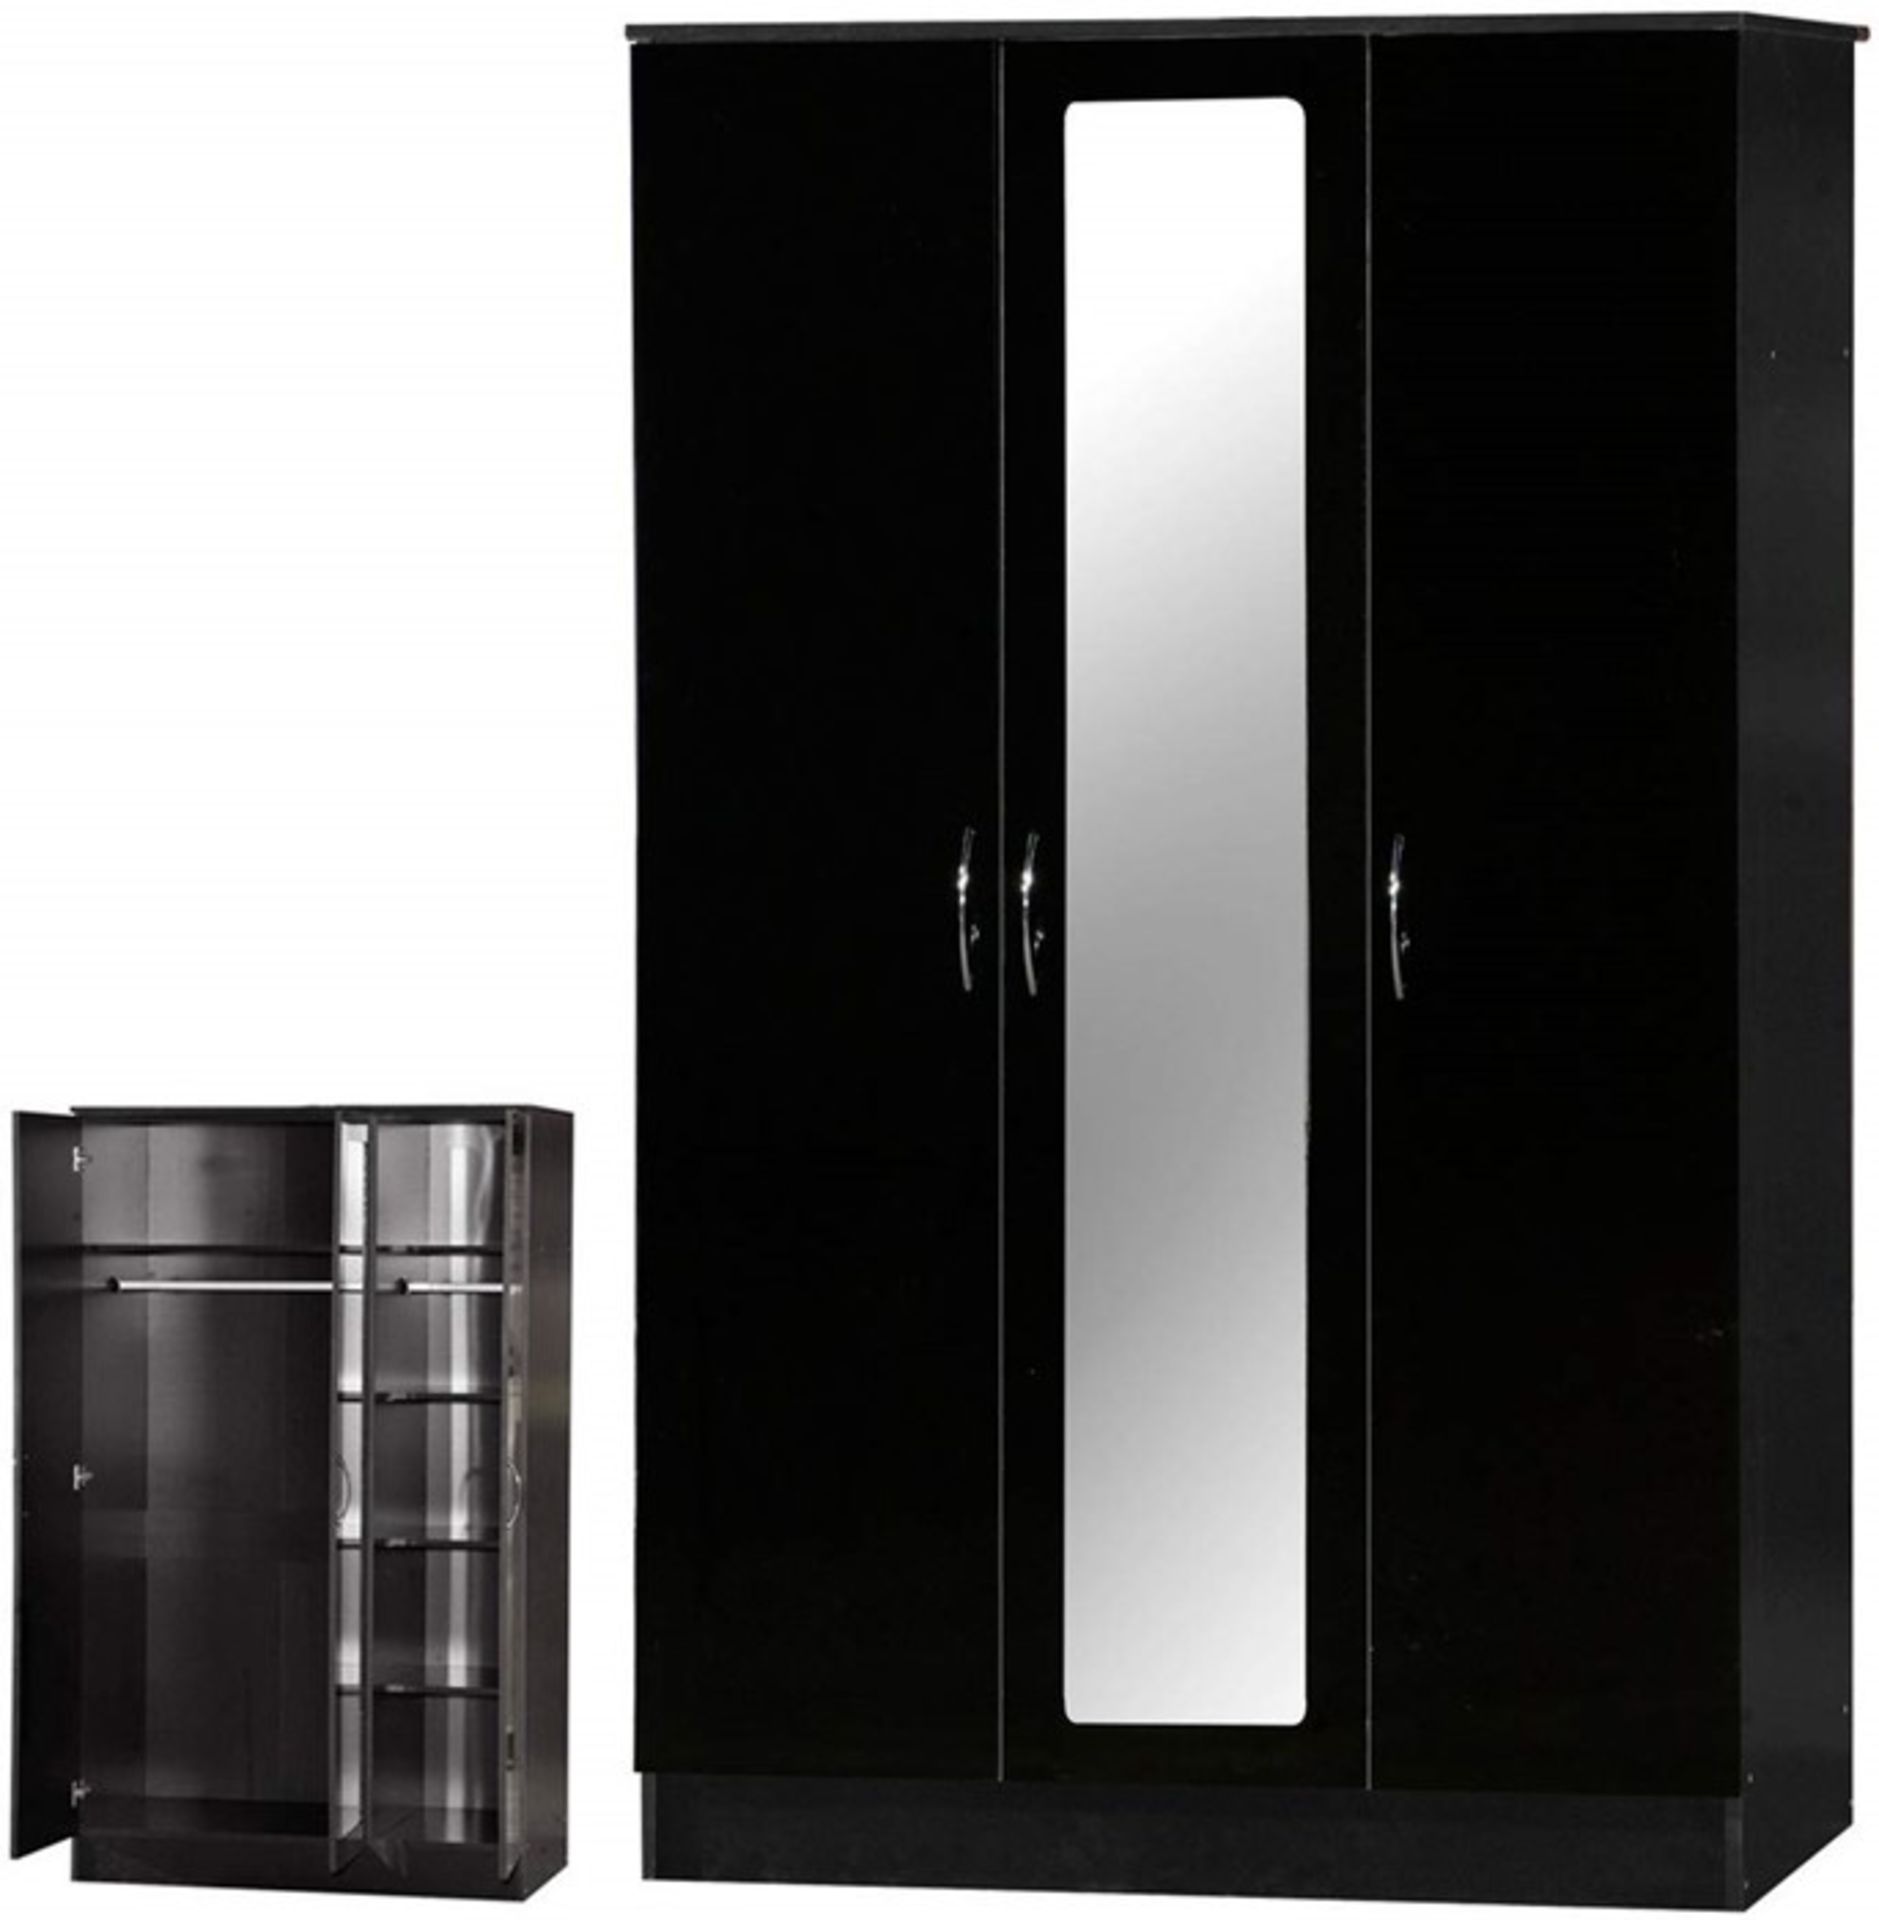 1 BOXED TWO TONE 3 DOOR MIRRORED WARDROBE IN BLACK GLOSS (PUBLIC VIEWING AVAILABLE)